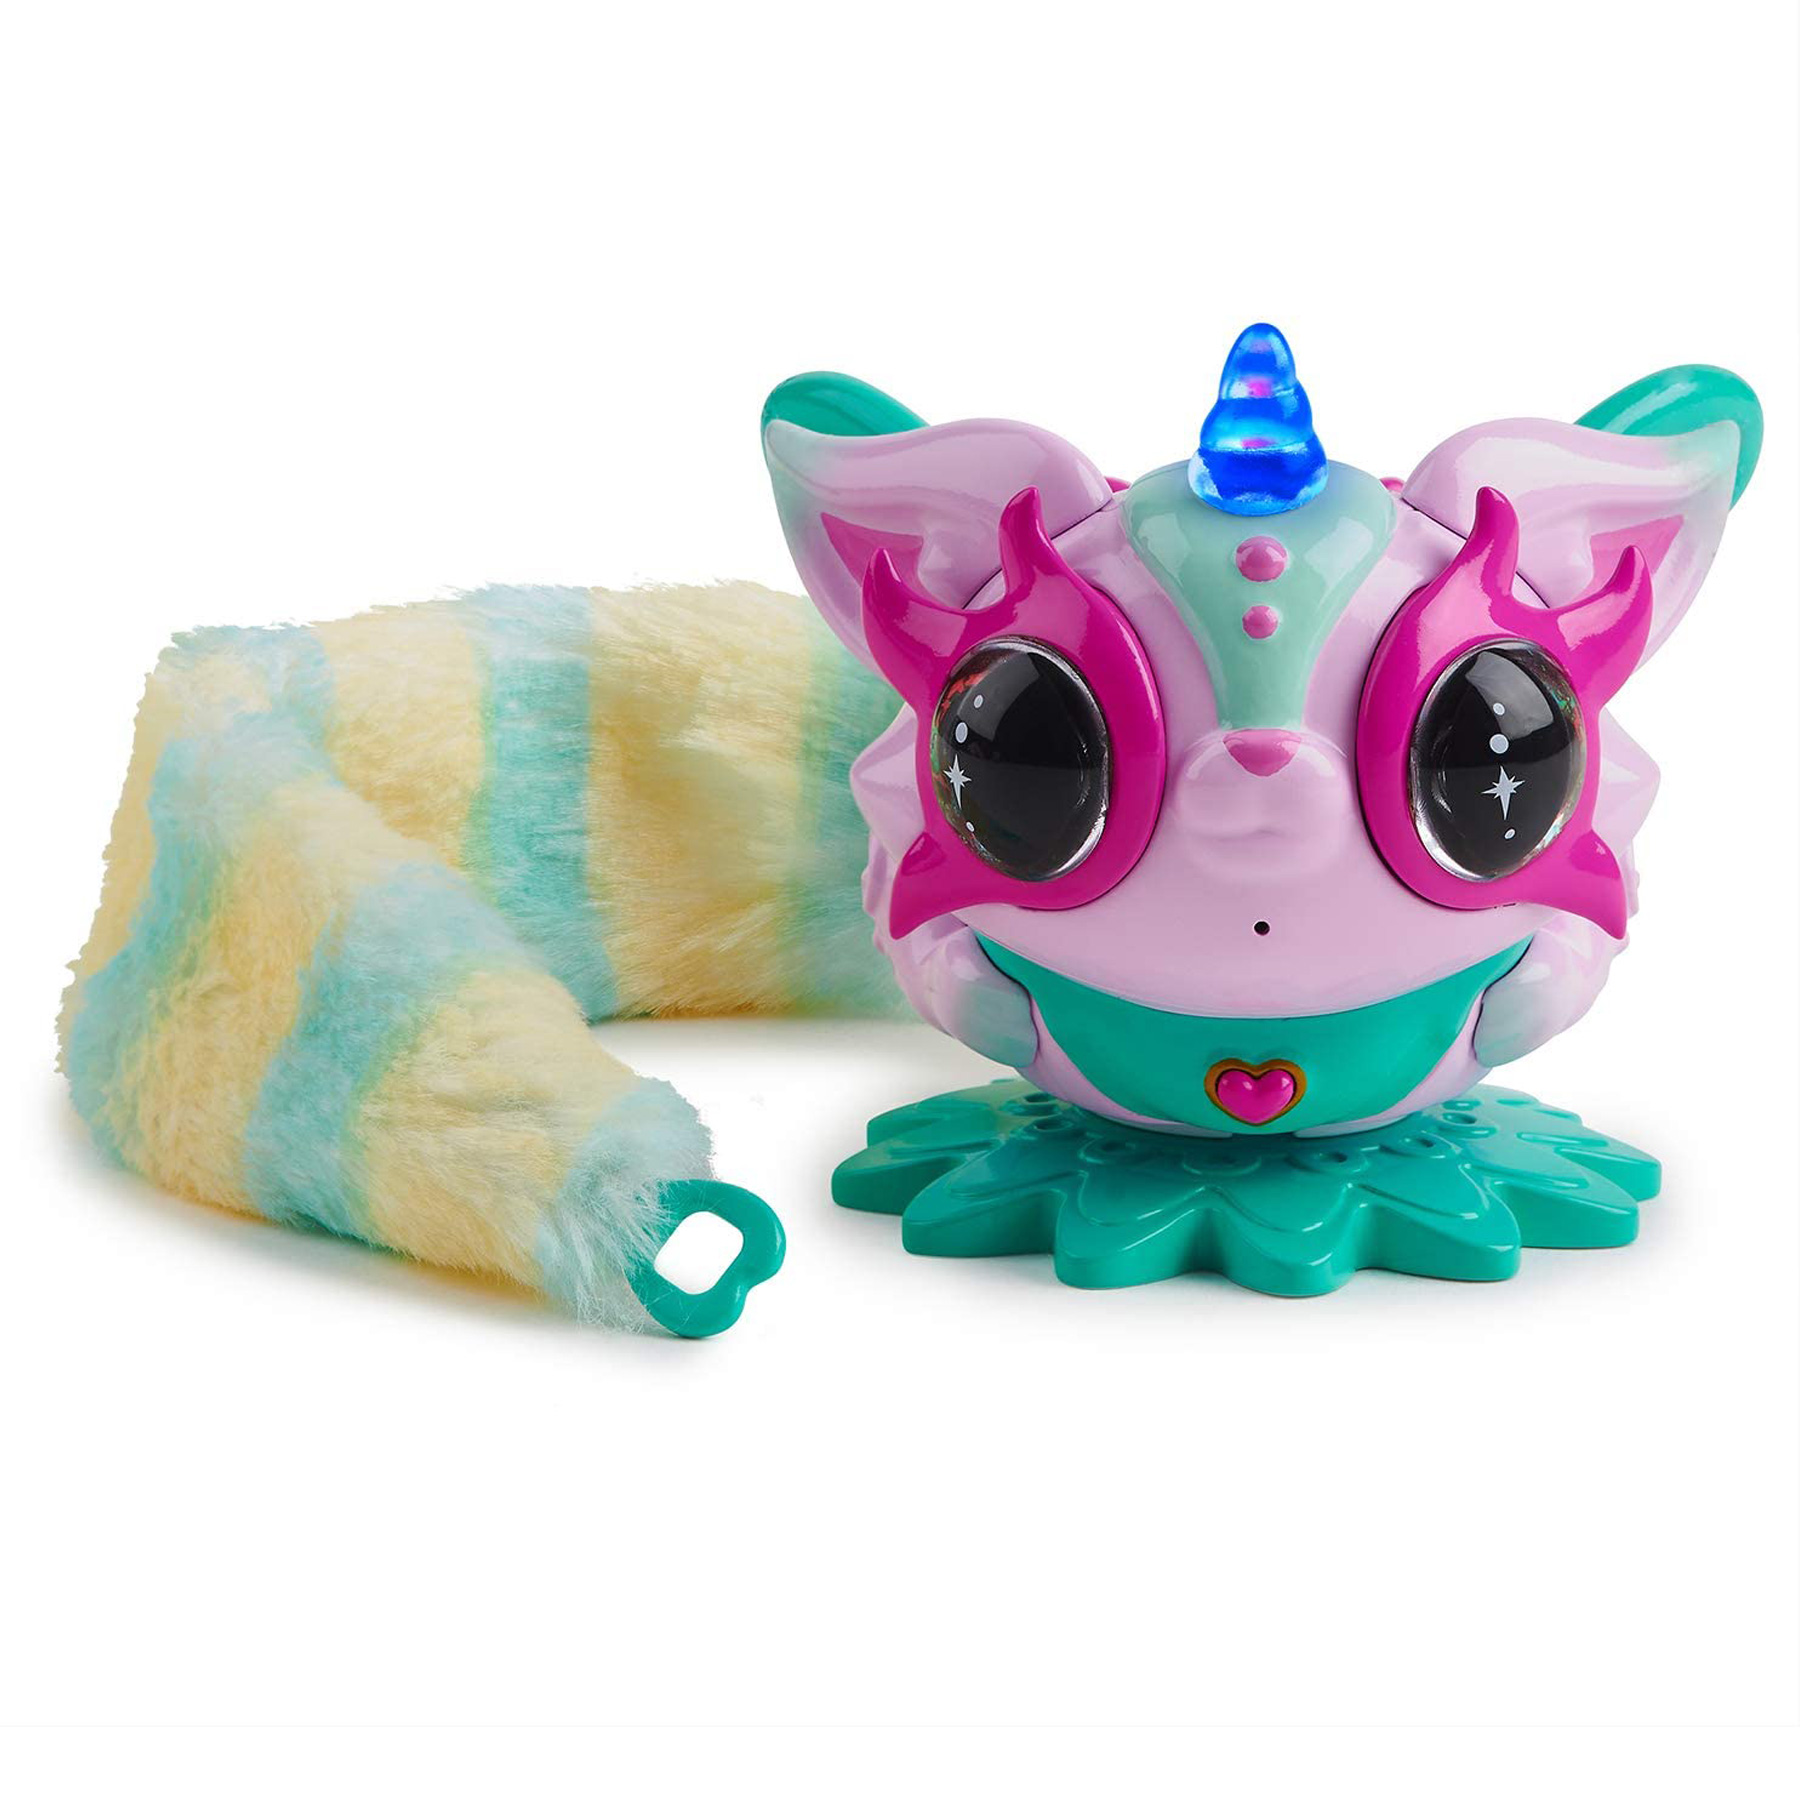 pixie-belles-interactive-enchanted-animal-toy-3